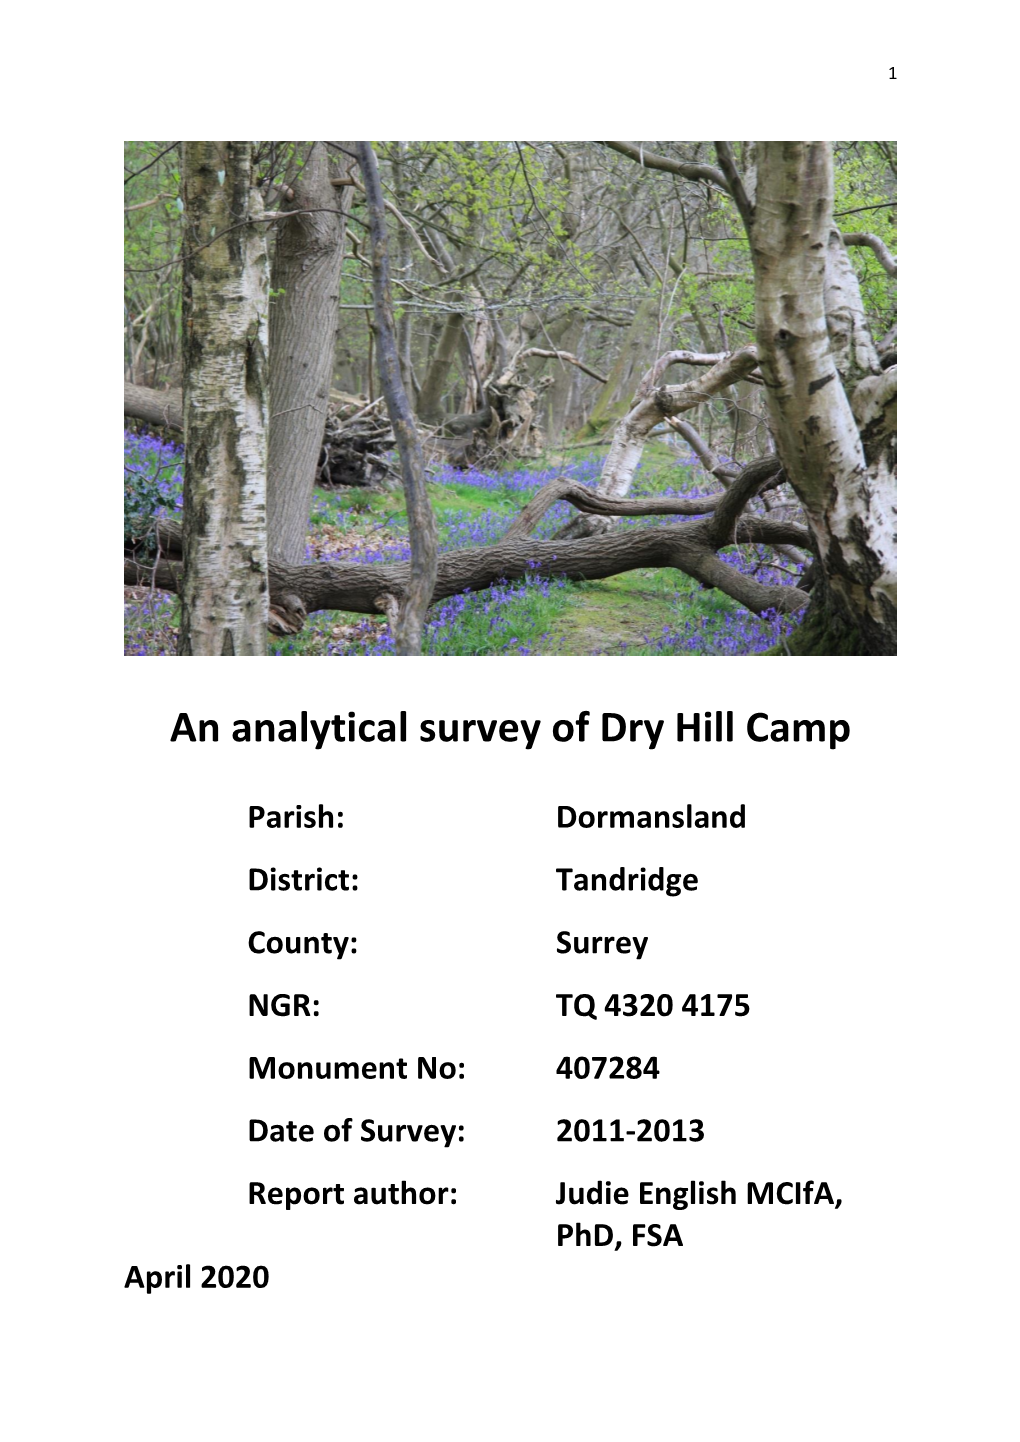 An Analytical Survey of Dry Hill Camp